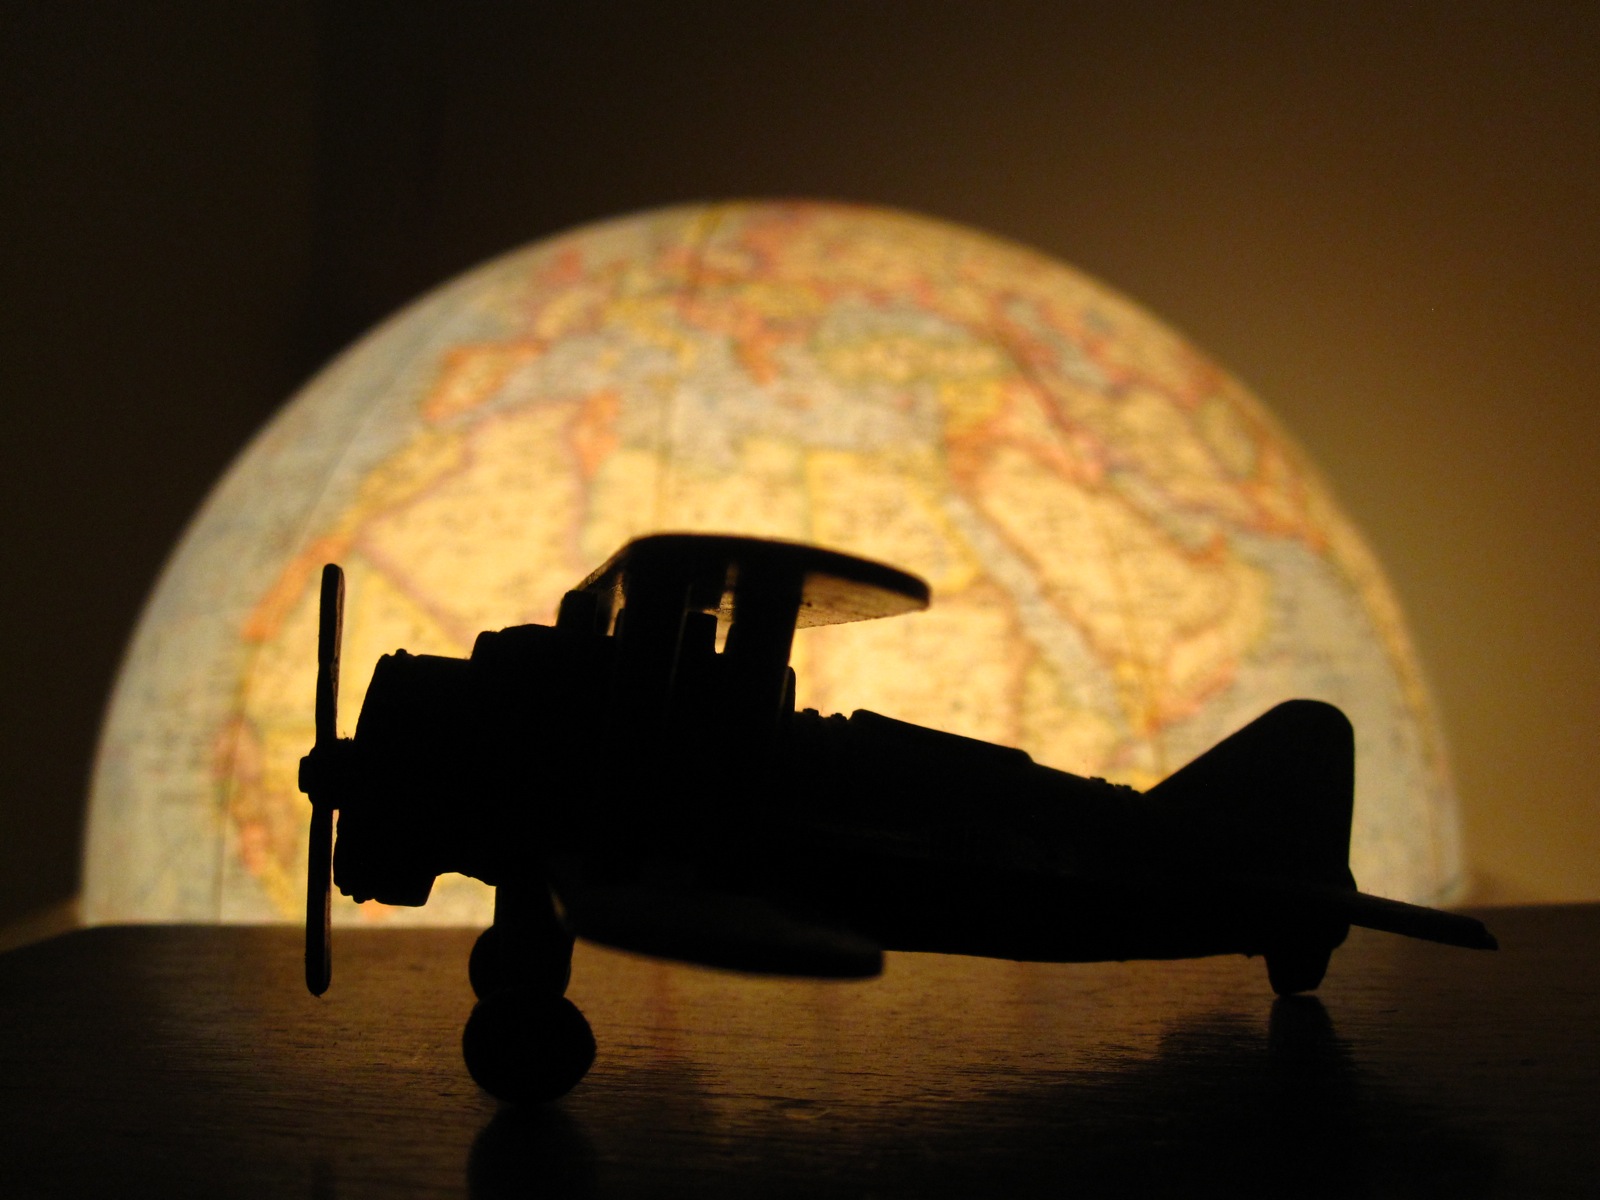 A toy airplane sits on a table in the dark. Behind it is a glowing globe.